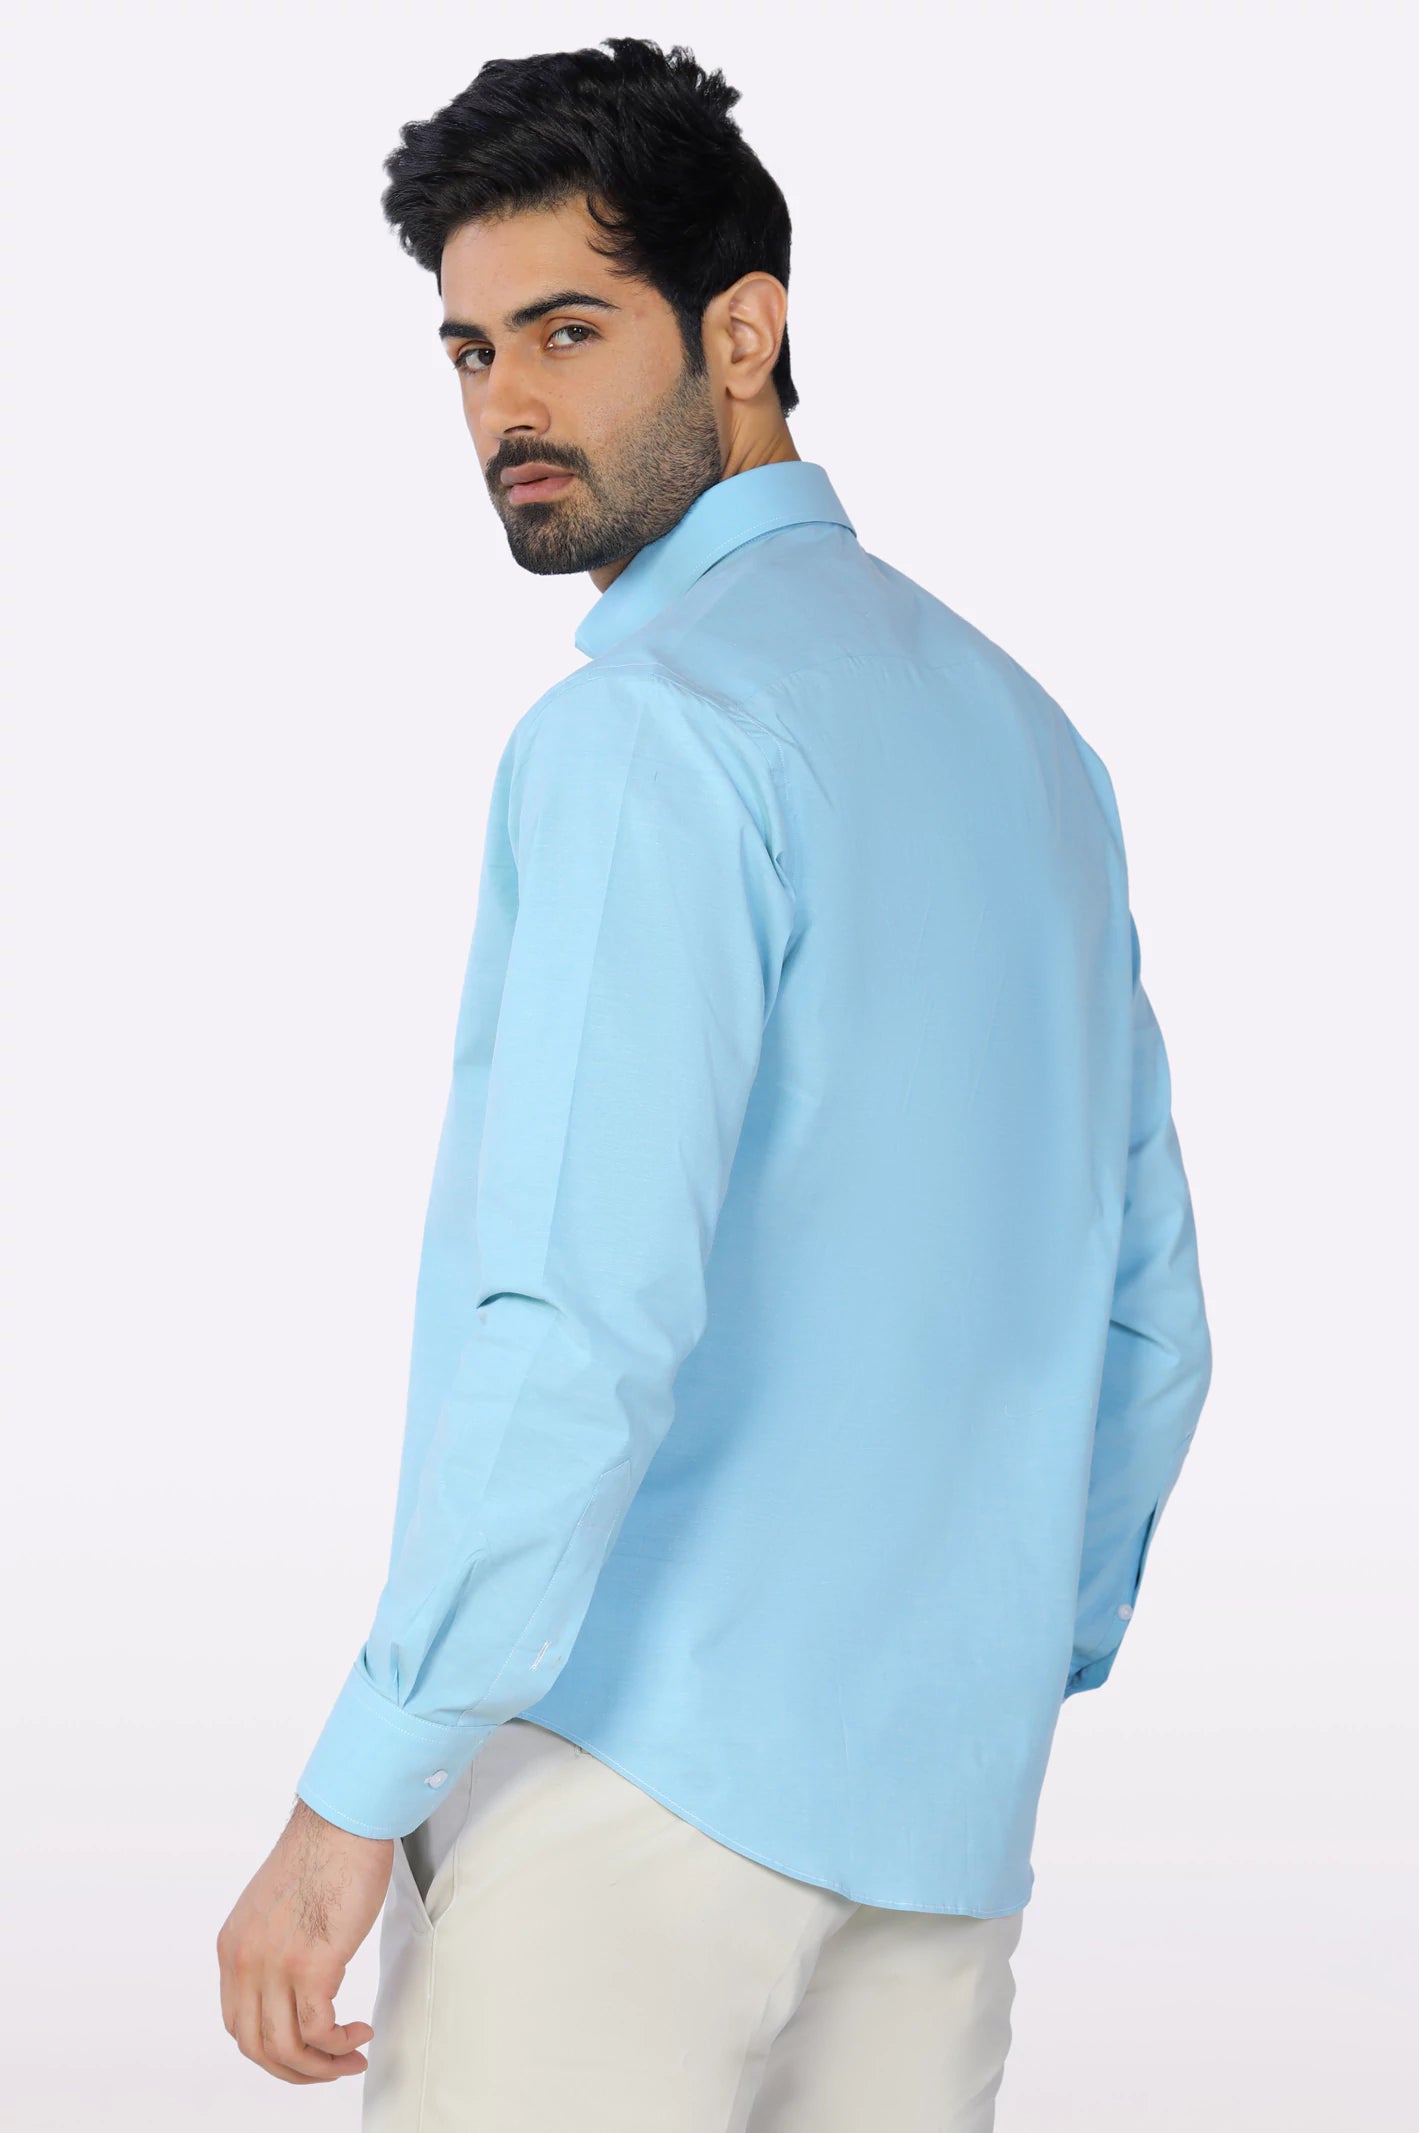 Blue Plain Casual Shirt From Diners